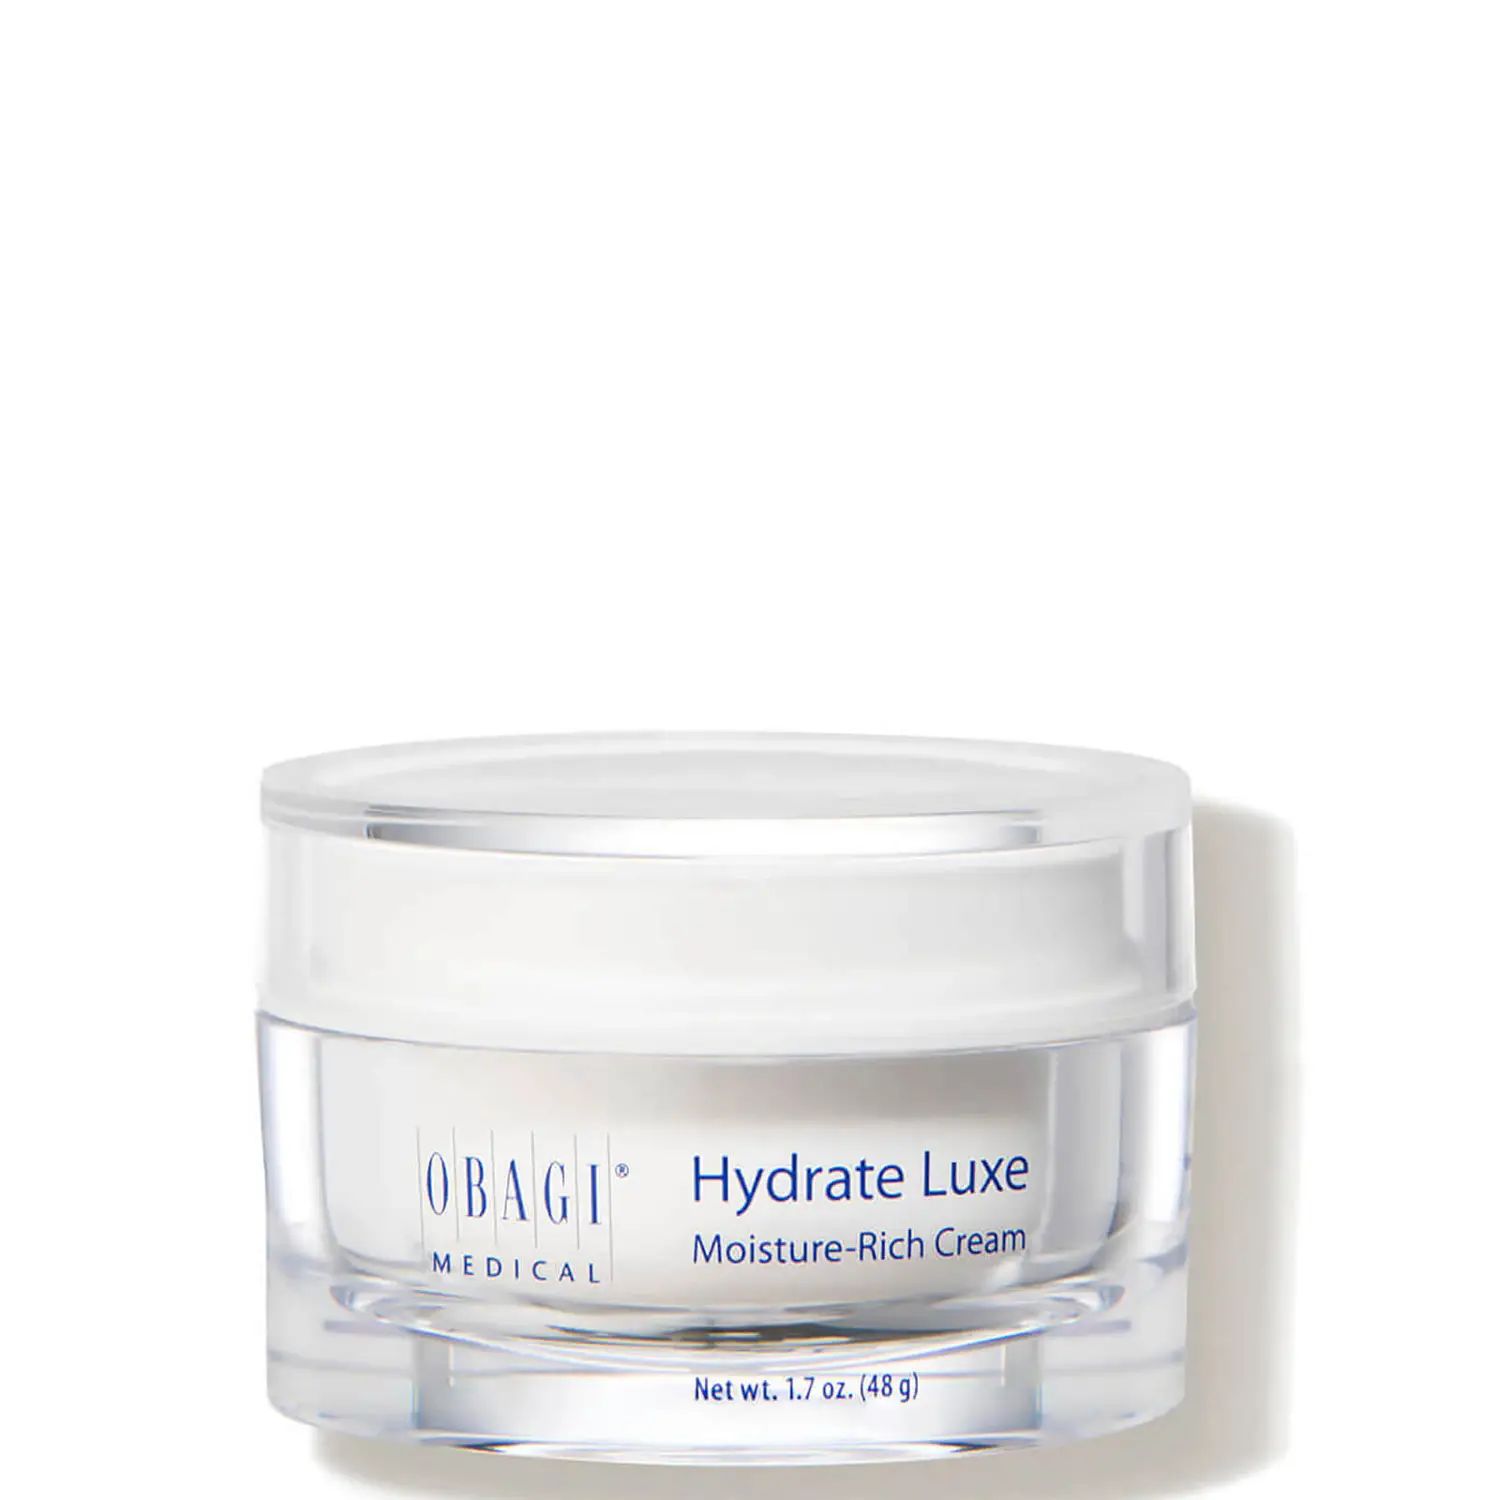 Obagi Medical Hydrate Luxe (1.7 oz.) | Dermstore